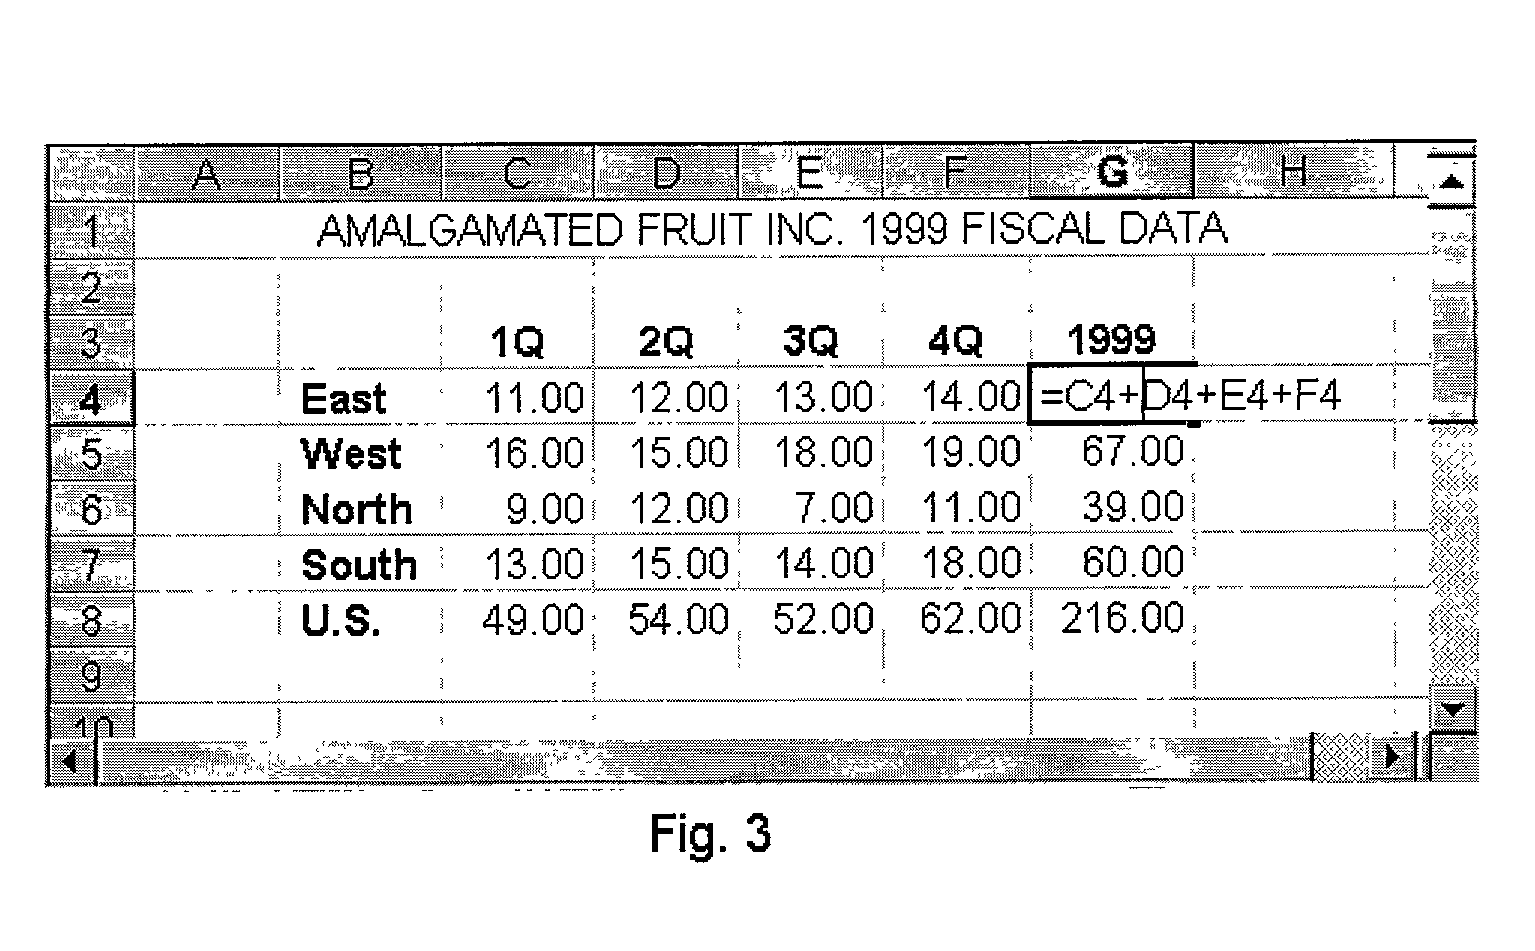 System and method for calculation using spreadsheet lines and vertical calculations in a single document